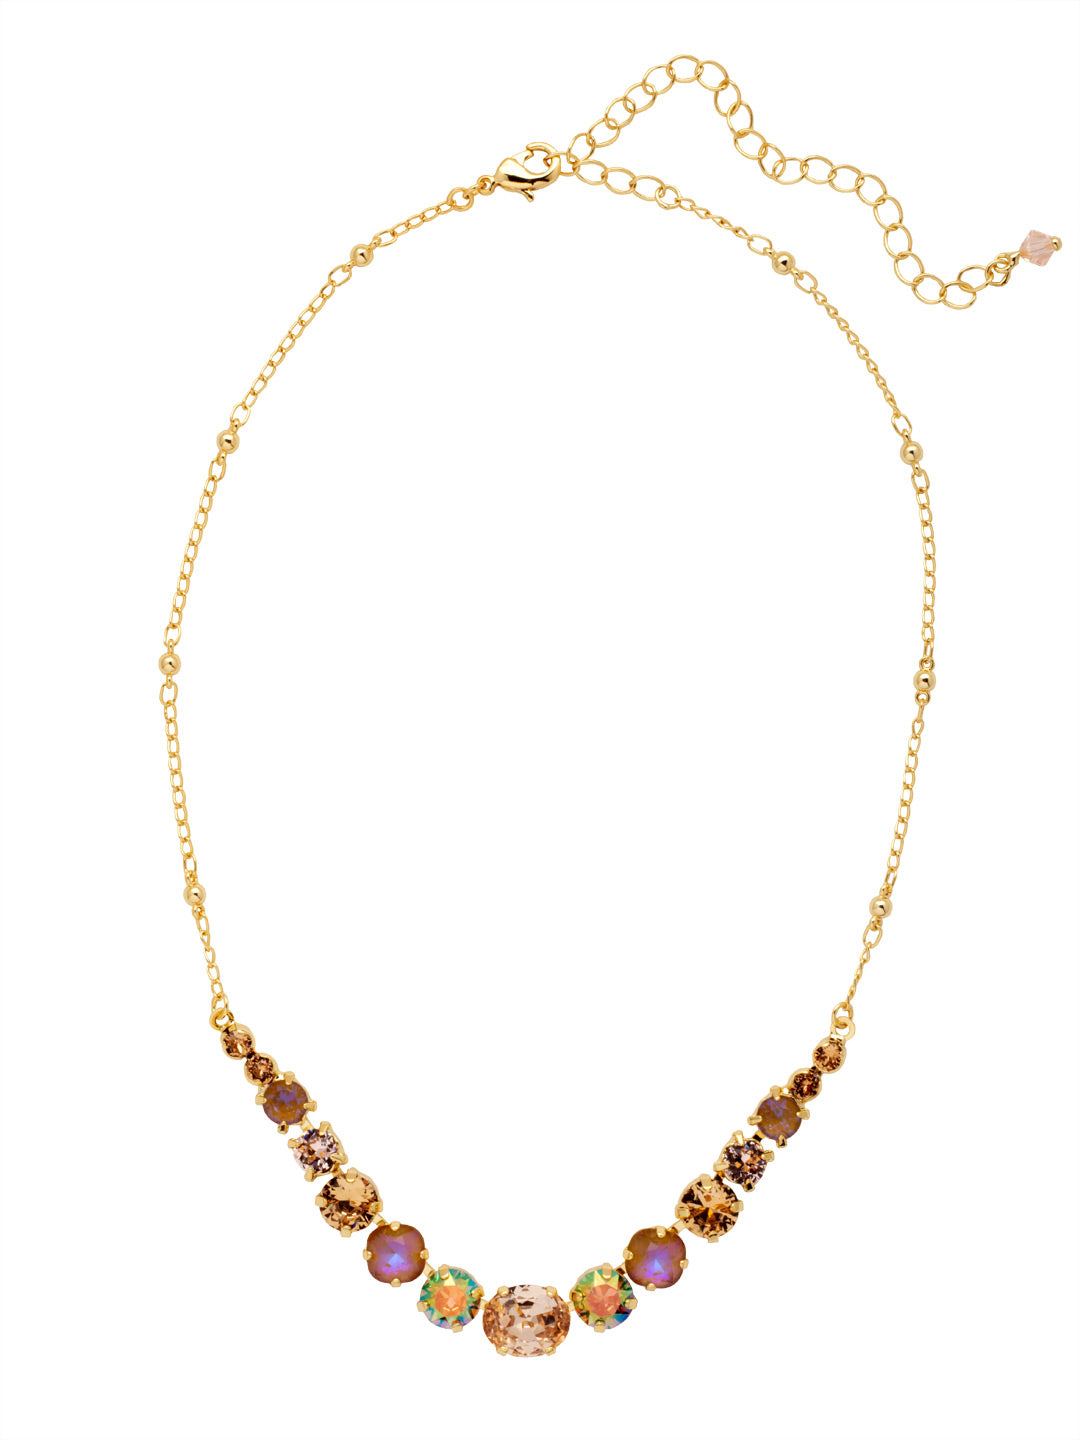 Jules Tennis Necklace - NDZ45BGRSU - Simple with a dash of sparkle. The Jules Tennis Necklace is perfect for a layered look or to be worn alone. From Sorrelli's Raw Sugar collection in our Bright Gold-tone finish.